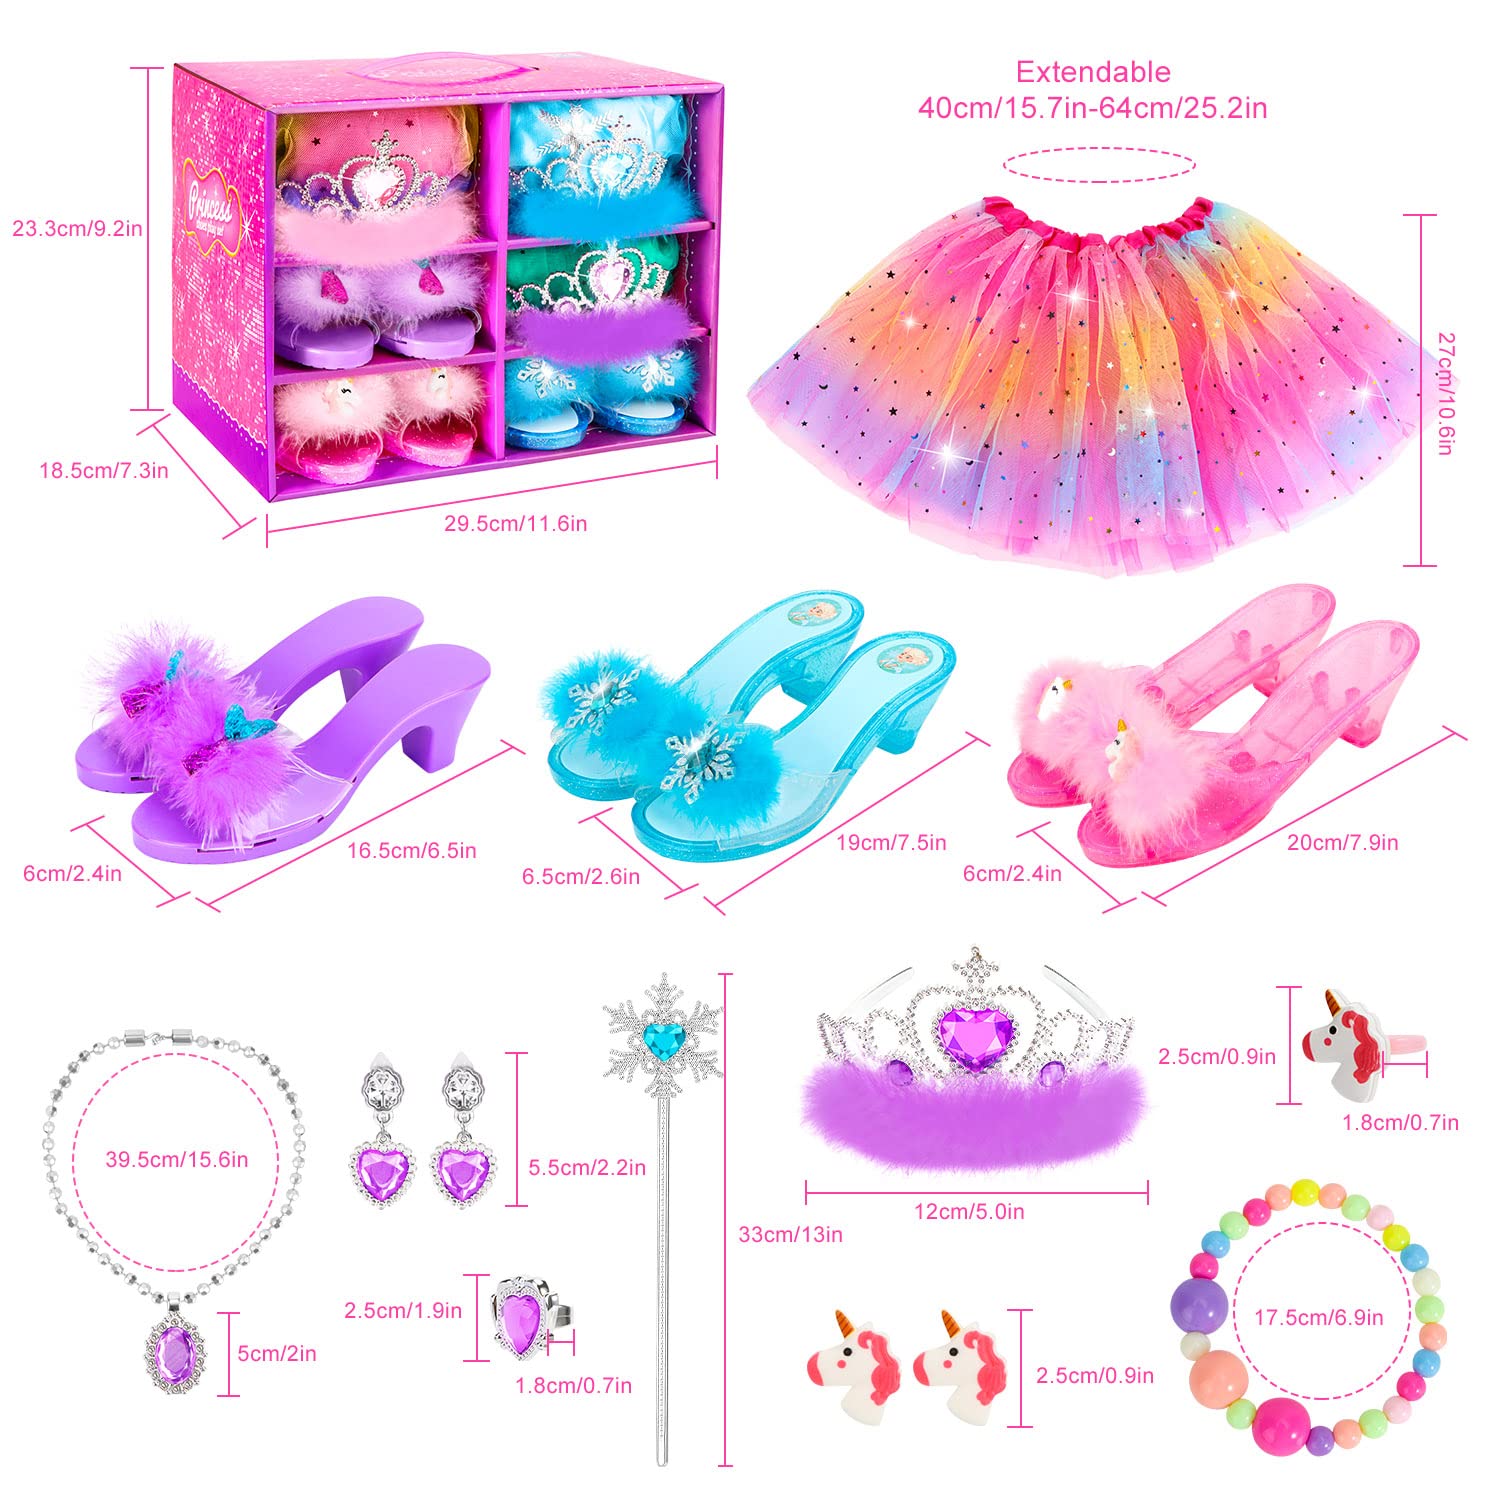 HAMSILY Princess Dress Up Shoes Set, Girls Dress Up Toys Toddler Jewelry Boutique Kit, 3 Themes of Unicorn Mermaid Ice Princess Costumes Set, Pretend Play Gifts for Little Girls Aged 3-6 Years Old